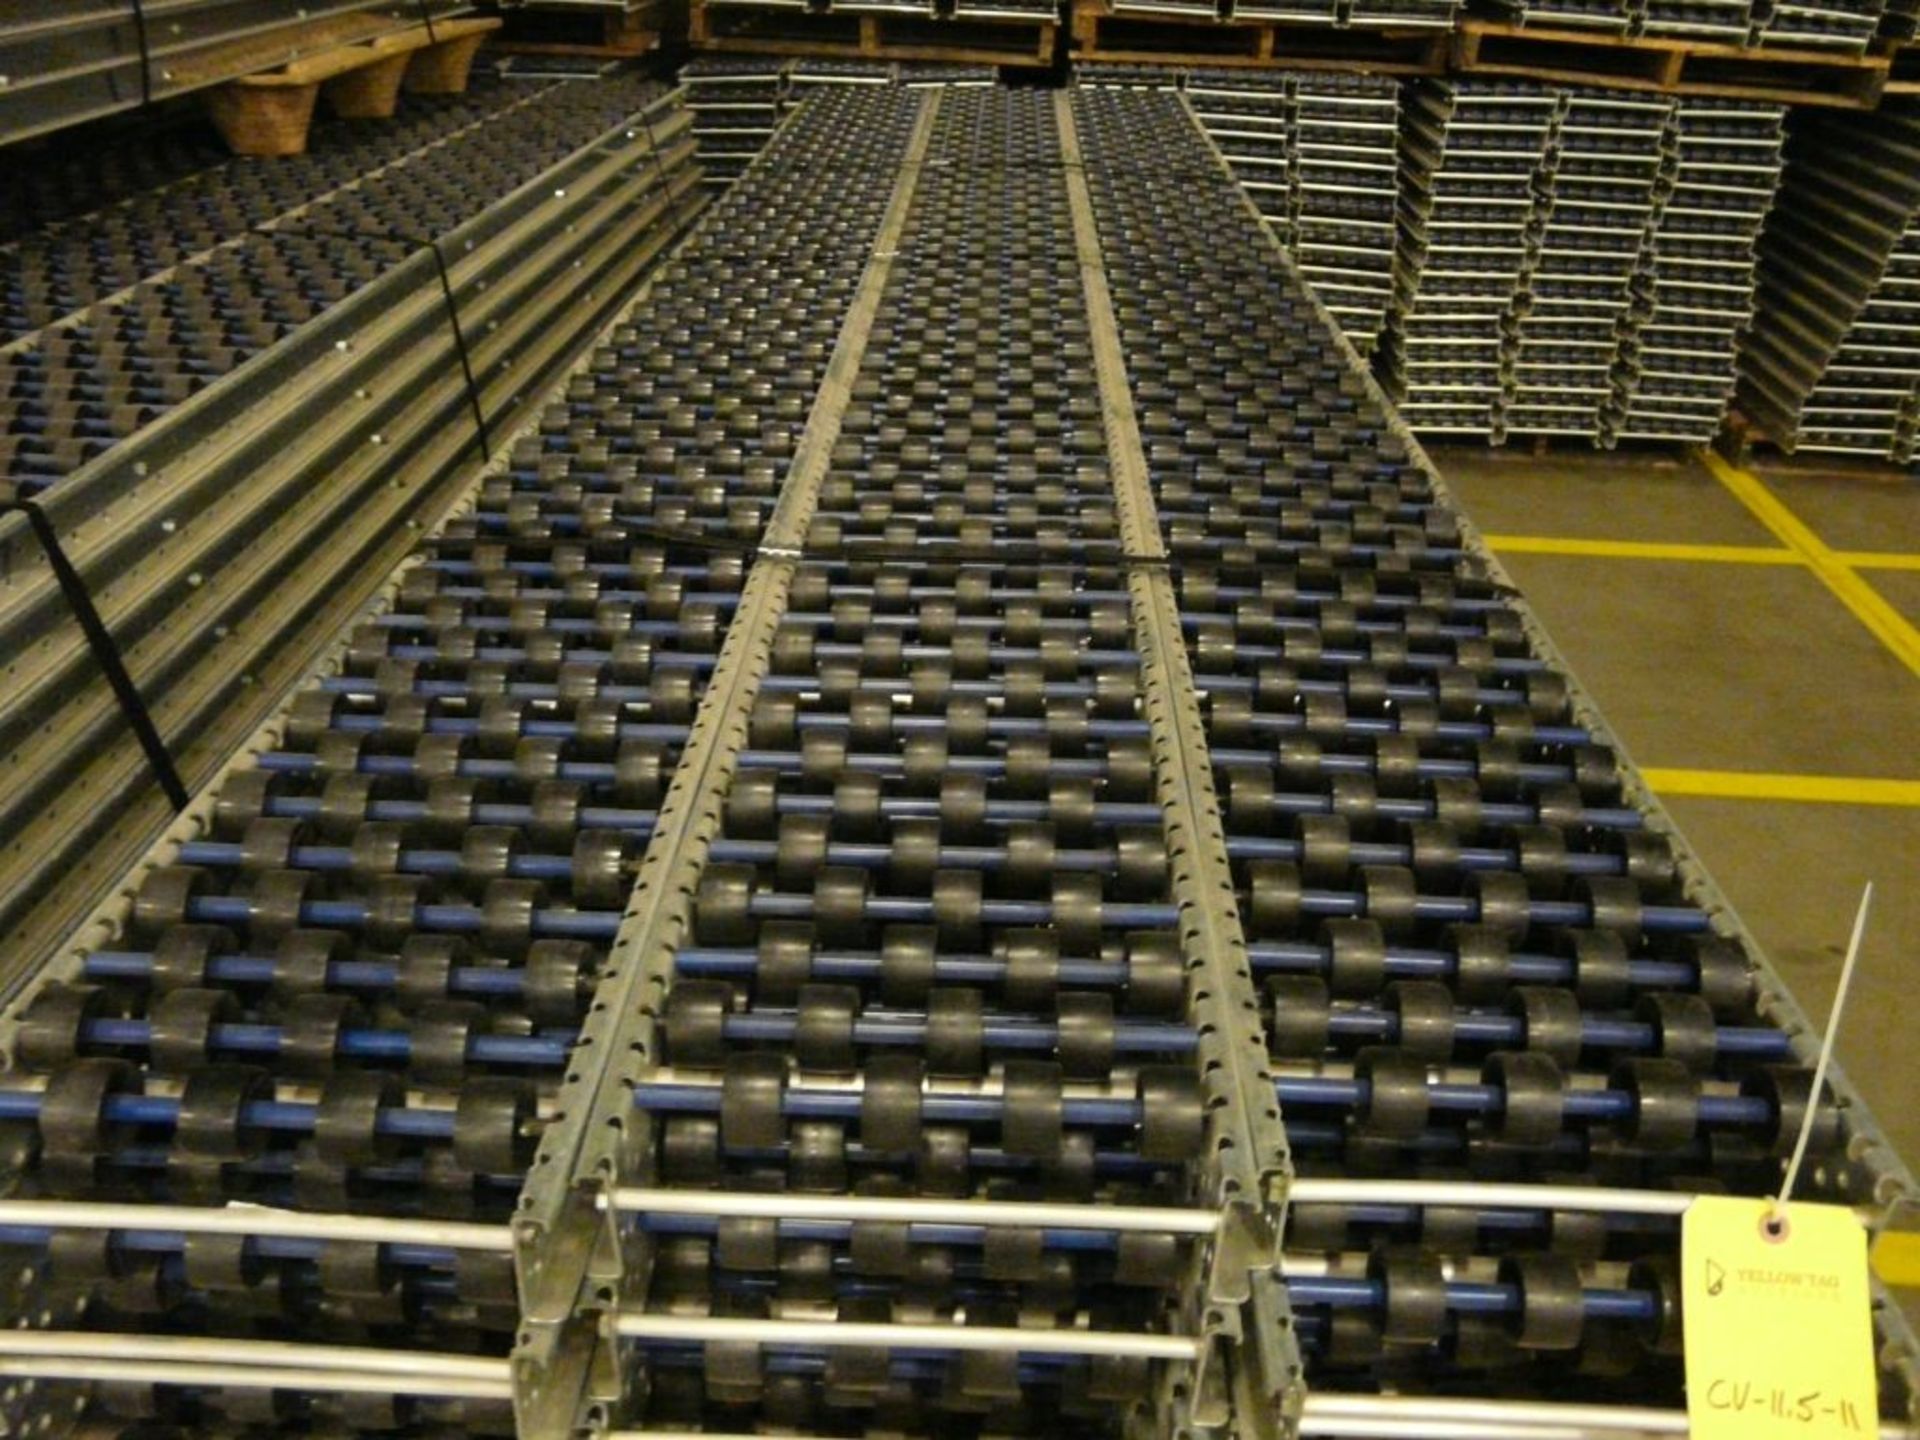 Lot of (90) SpanTrack Wheelbed Carton Flow Conveyors - 11.5'L x 11"W; Tag: 223610 - $30 Lot - Image 3 of 4